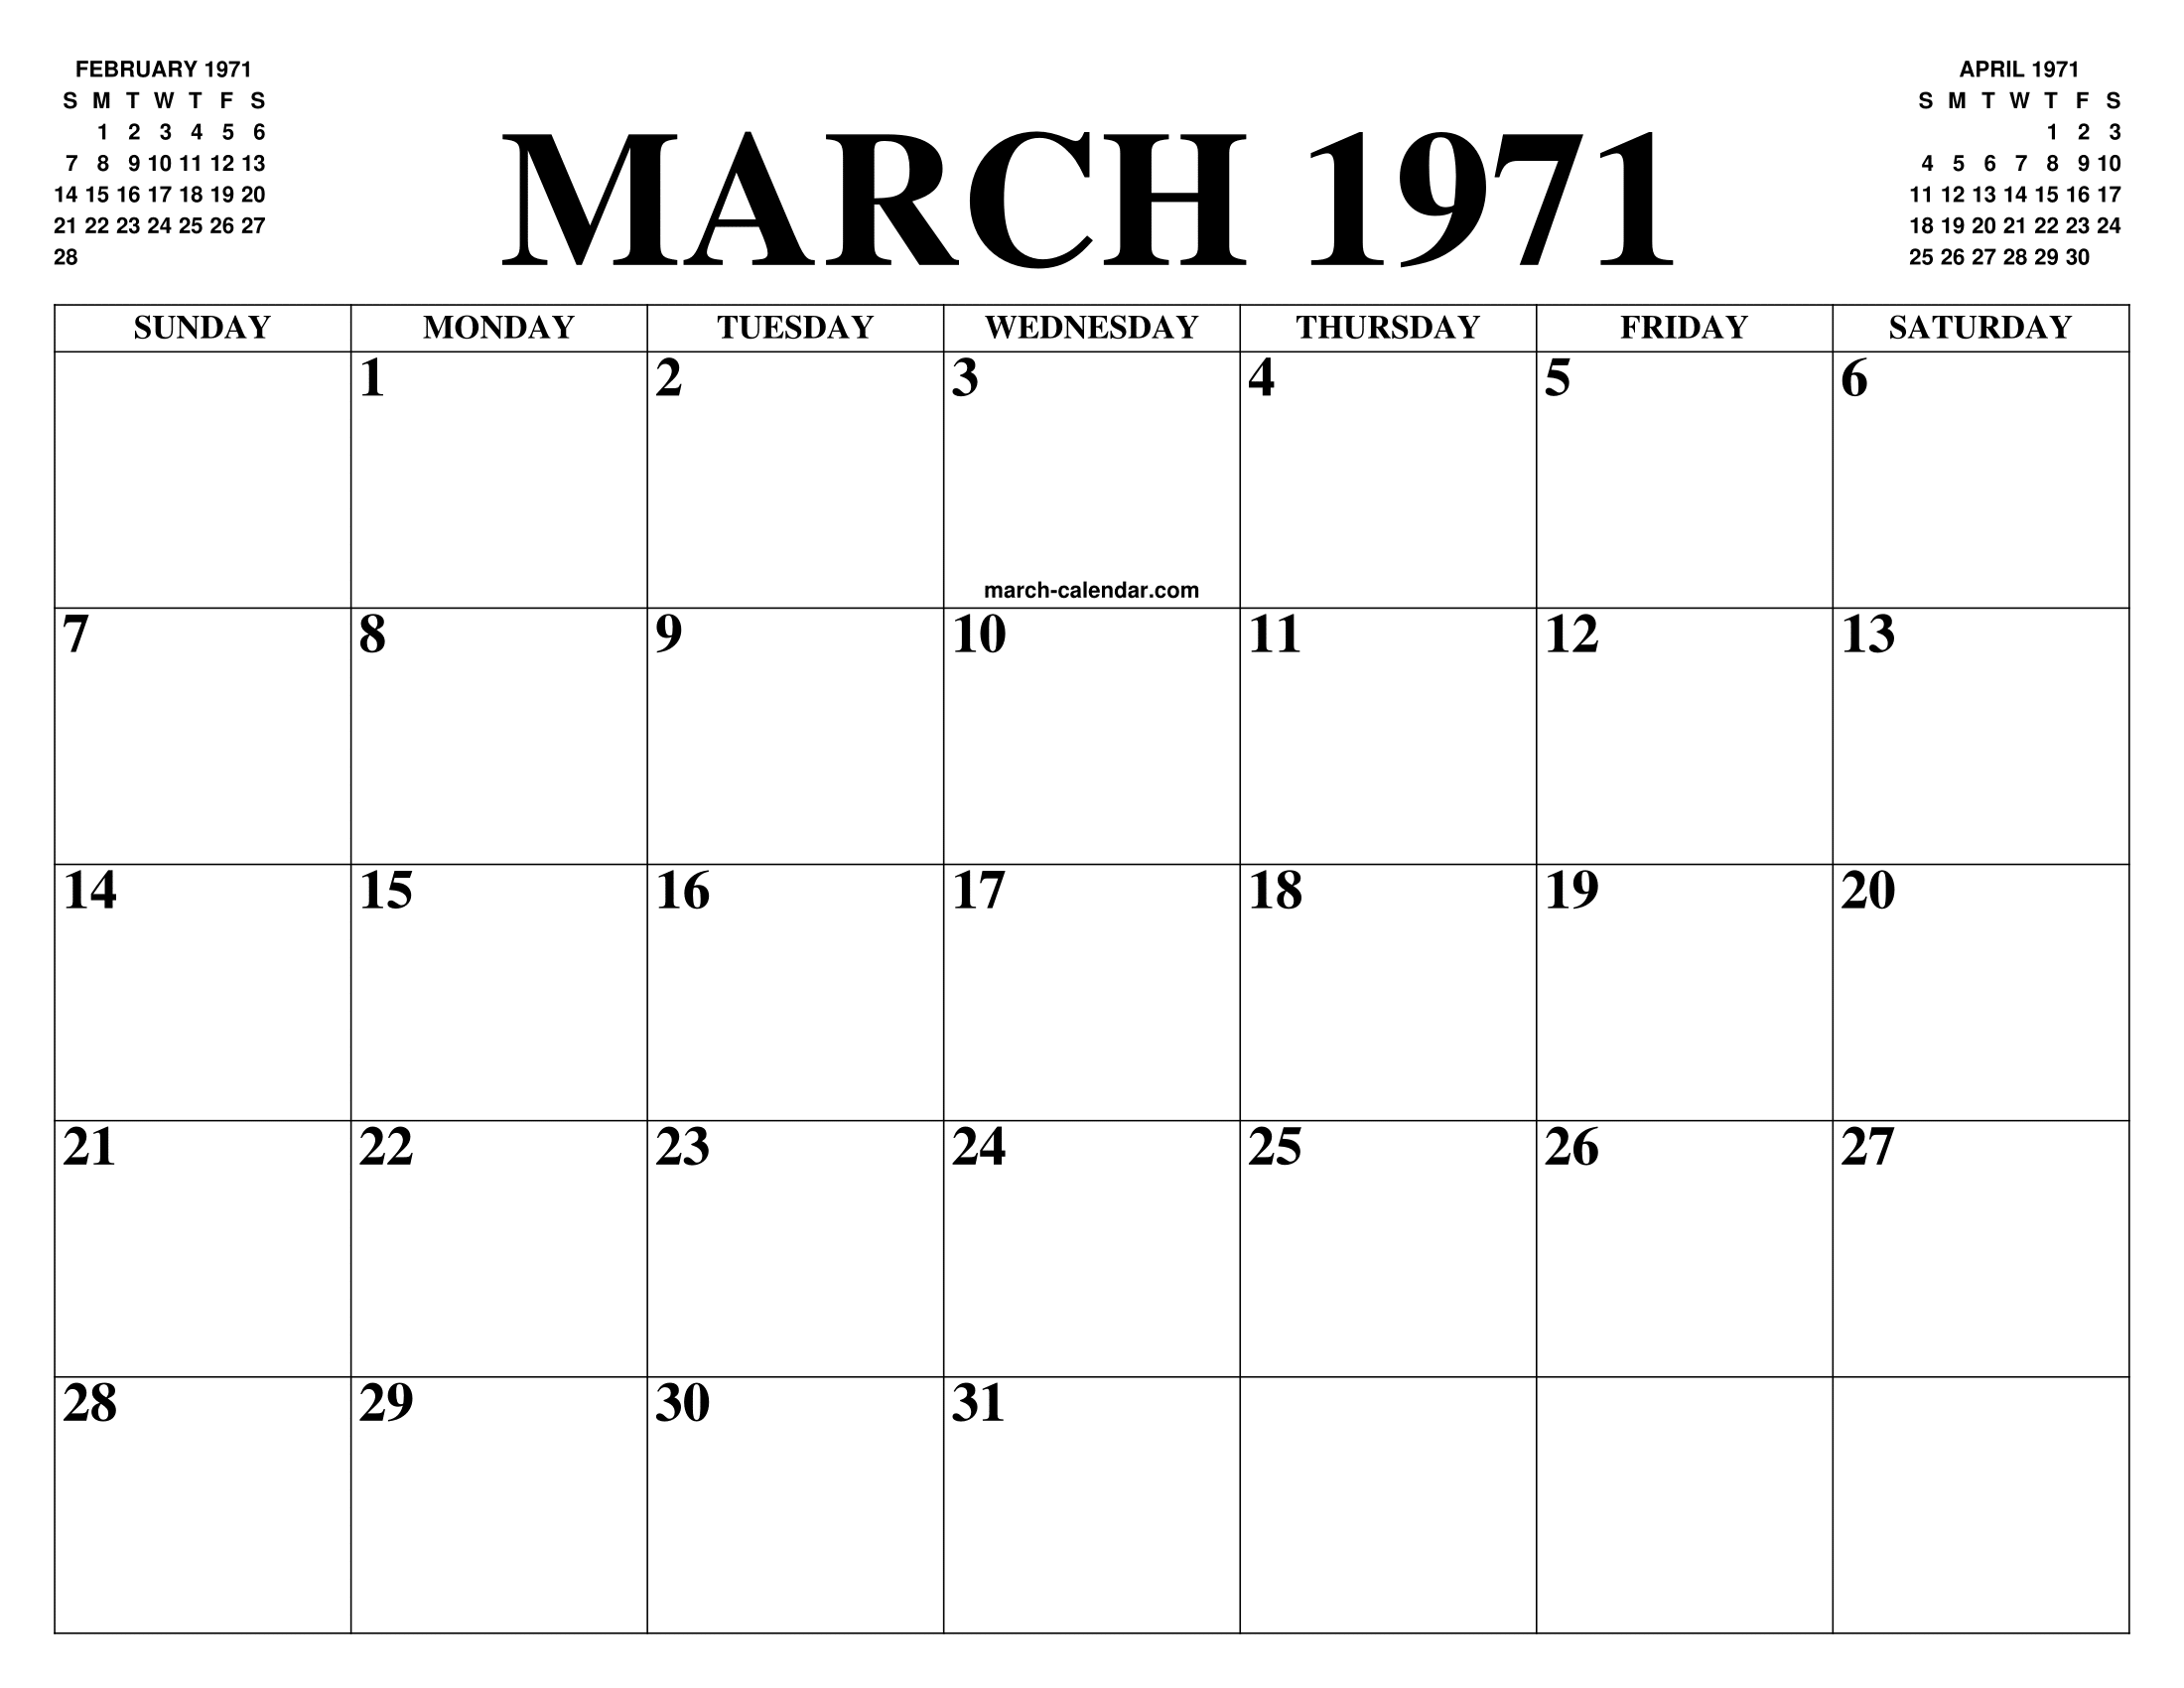 MARCH 1971 CALENDAR OF THE MONTH: FREE PRINTABLE MARCH CALENDAR OF THE